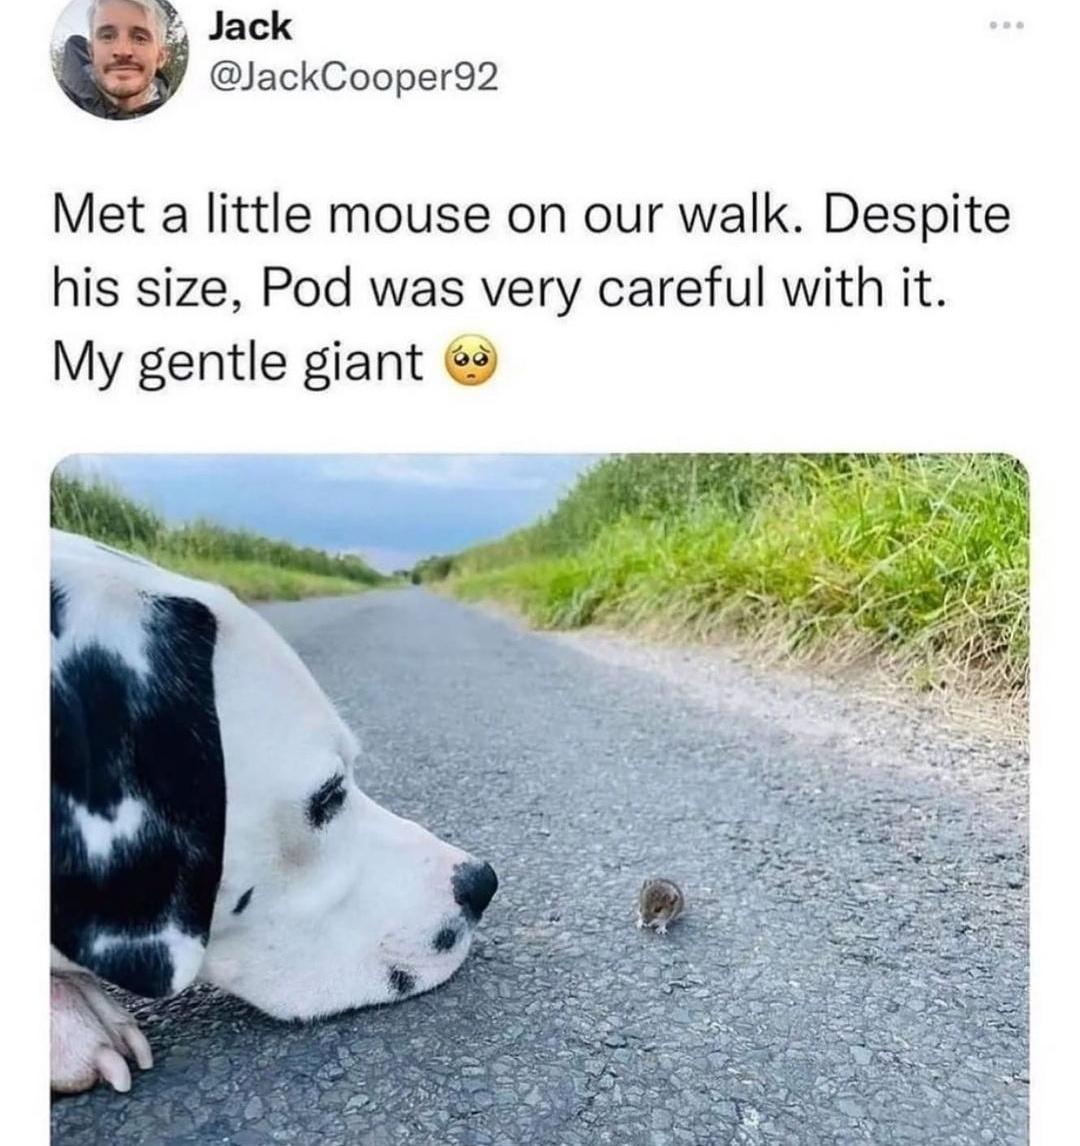 funny memes - met a little mouse on our walk despite his size pod was very careful with it my gentle giant - Jack Met a little mouse on our walk. Despite his size, Pod was very careful with it. My gentle giant